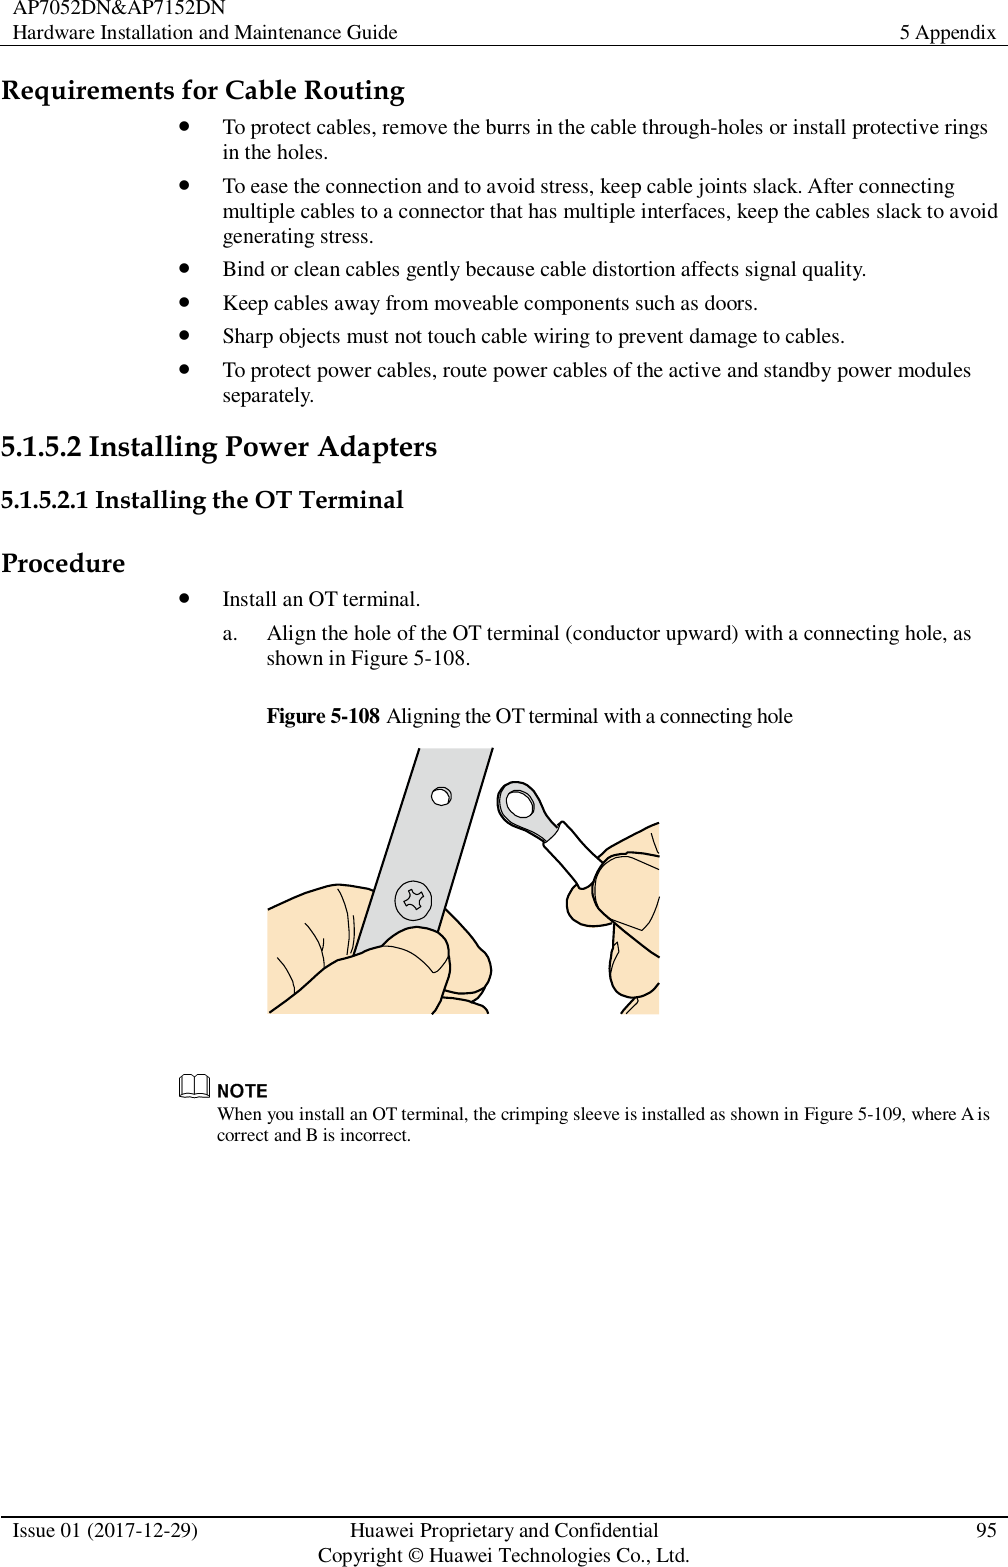 AP7052DN&amp;AP7152DN Hardware Installation and Maintenance Guide 5 Appendix  Issue 01 (2017-12-29) Huawei Proprietary and Confidential                                     Copyright © Huawei Technologies Co., Ltd. 95  Requirements for Cable Routing  To protect cables, remove the burrs in the cable through-holes or install protective rings in the holes.  To ease the connection and to avoid stress, keep cable joints slack. After connecting multiple cables to a connector that has multiple interfaces, keep the cables slack to avoid generating stress.  Bind or clean cables gently because cable distortion affects signal quality.  Keep cables away from moveable components such as doors.  Sharp objects must not touch cable wiring to prevent damage to cables.  To protect power cables, route power cables of the active and standby power modules separately. 5.1.5.2 Installing Power Adapters 5.1.5.2.1 Installing the OT Terminal Procedure  Install an OT terminal. a. Align the hole of the OT terminal (conductor upward) with a connecting hole, as shown in Figure 5-108. Figure 5-108 Aligning the OT terminal with a connecting hole    When you install an OT terminal, the crimping sleeve is installed as shown in Figure 5-109, where A is correct and B is incorrect. 